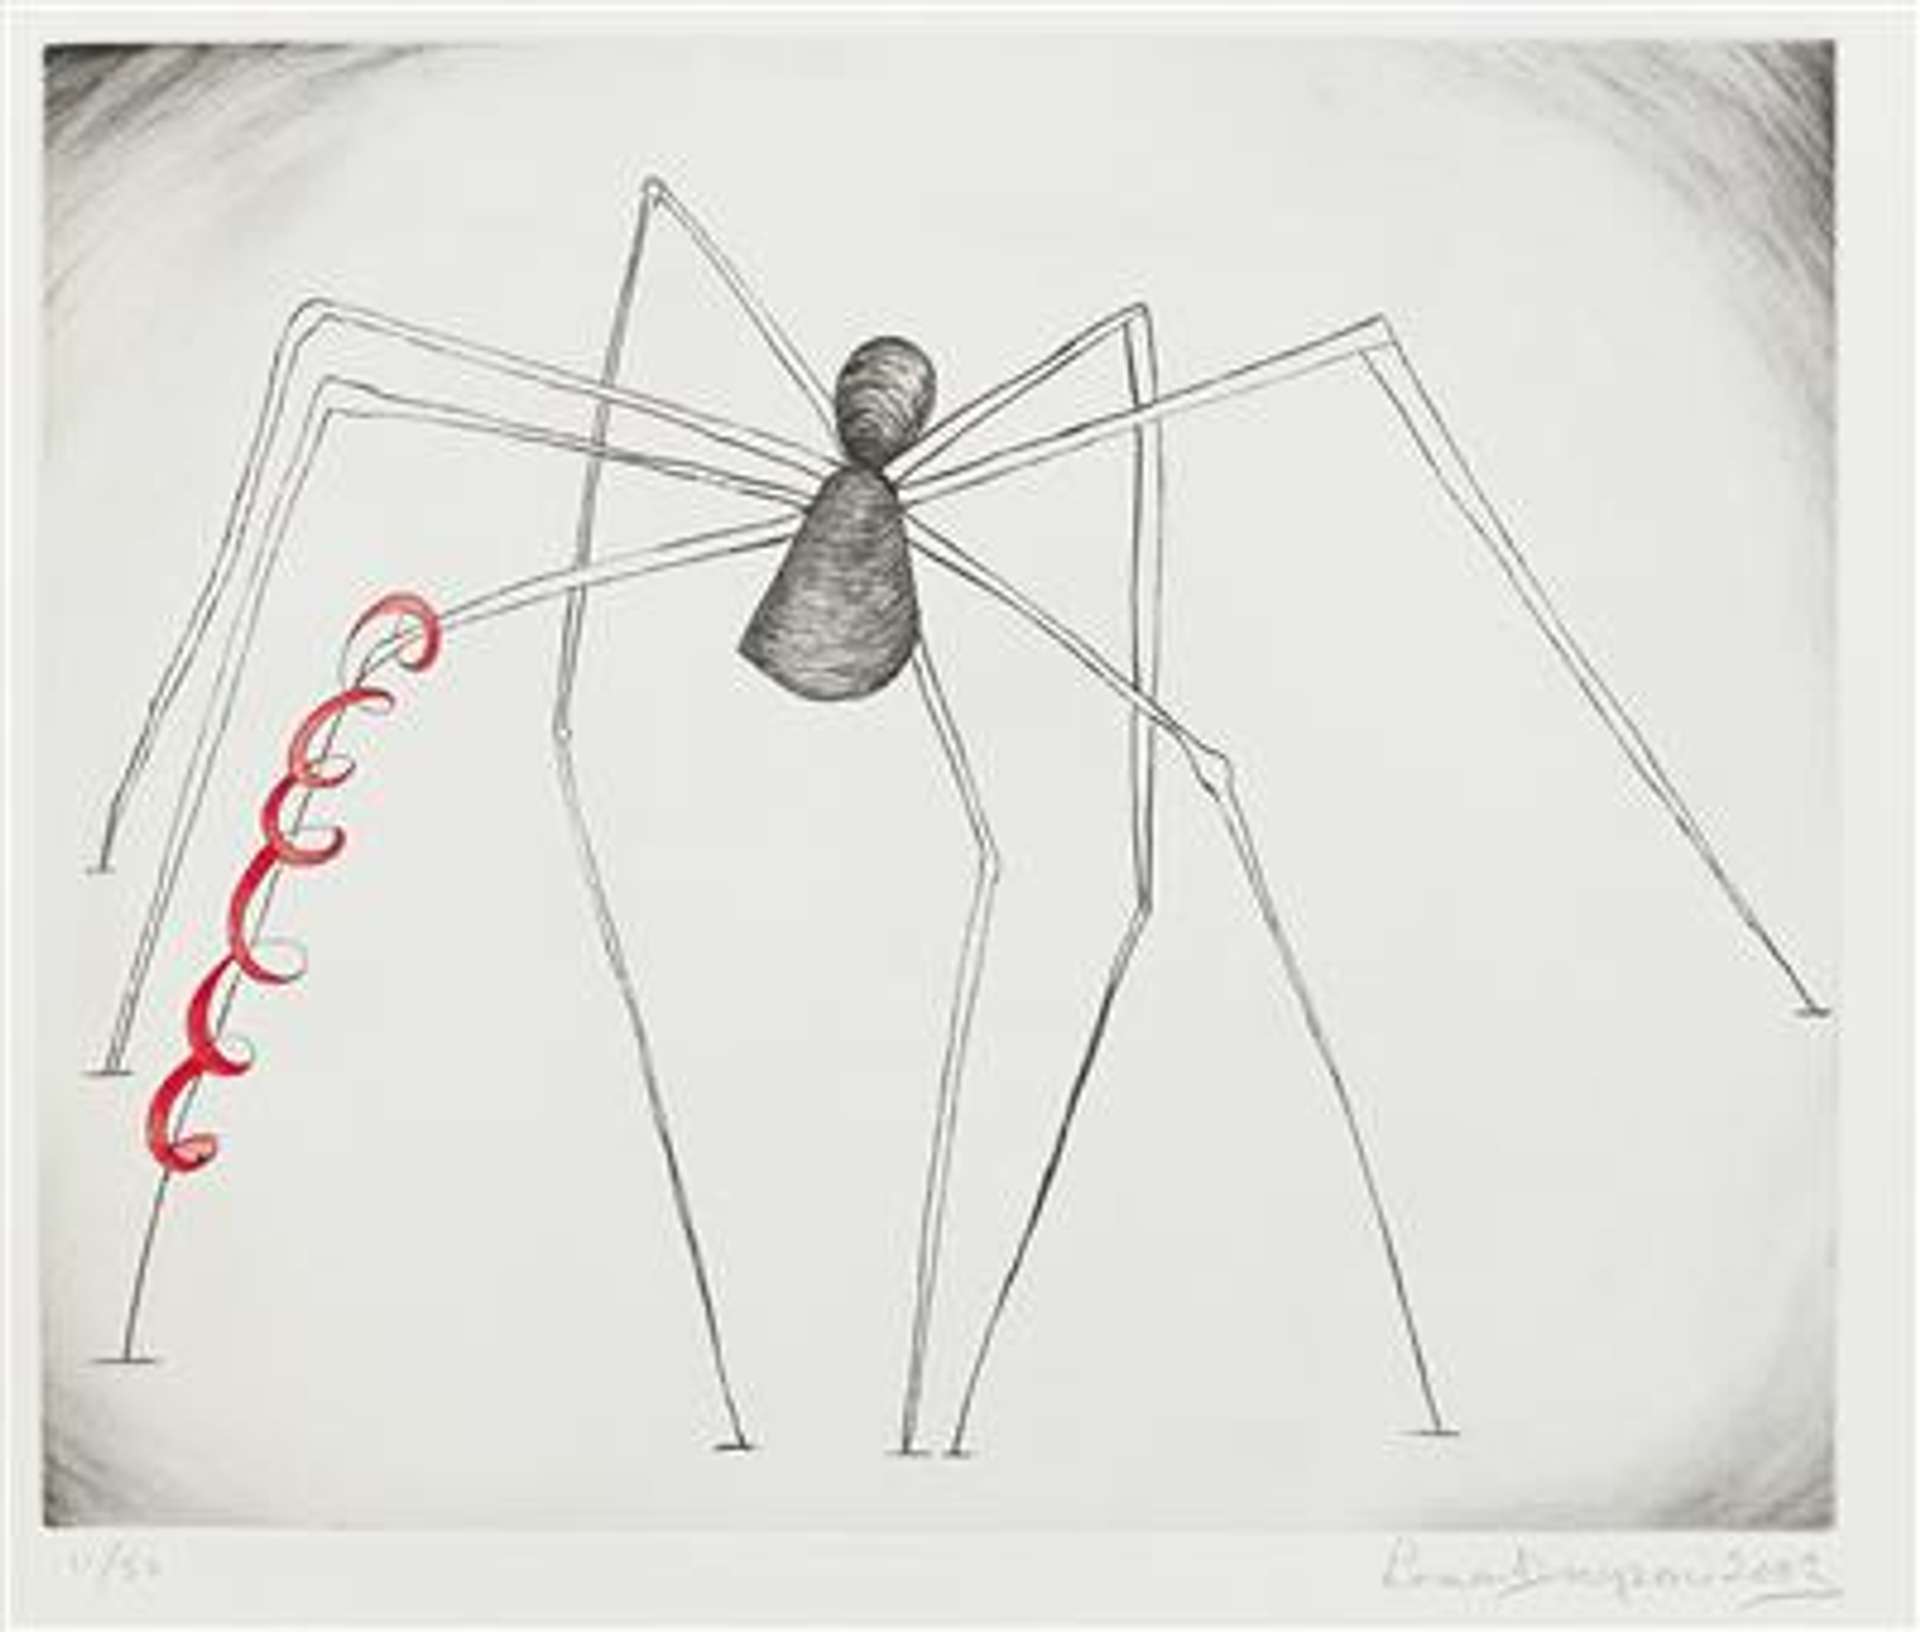 10 Facts About Louise Bourgeois, MyArtBroker